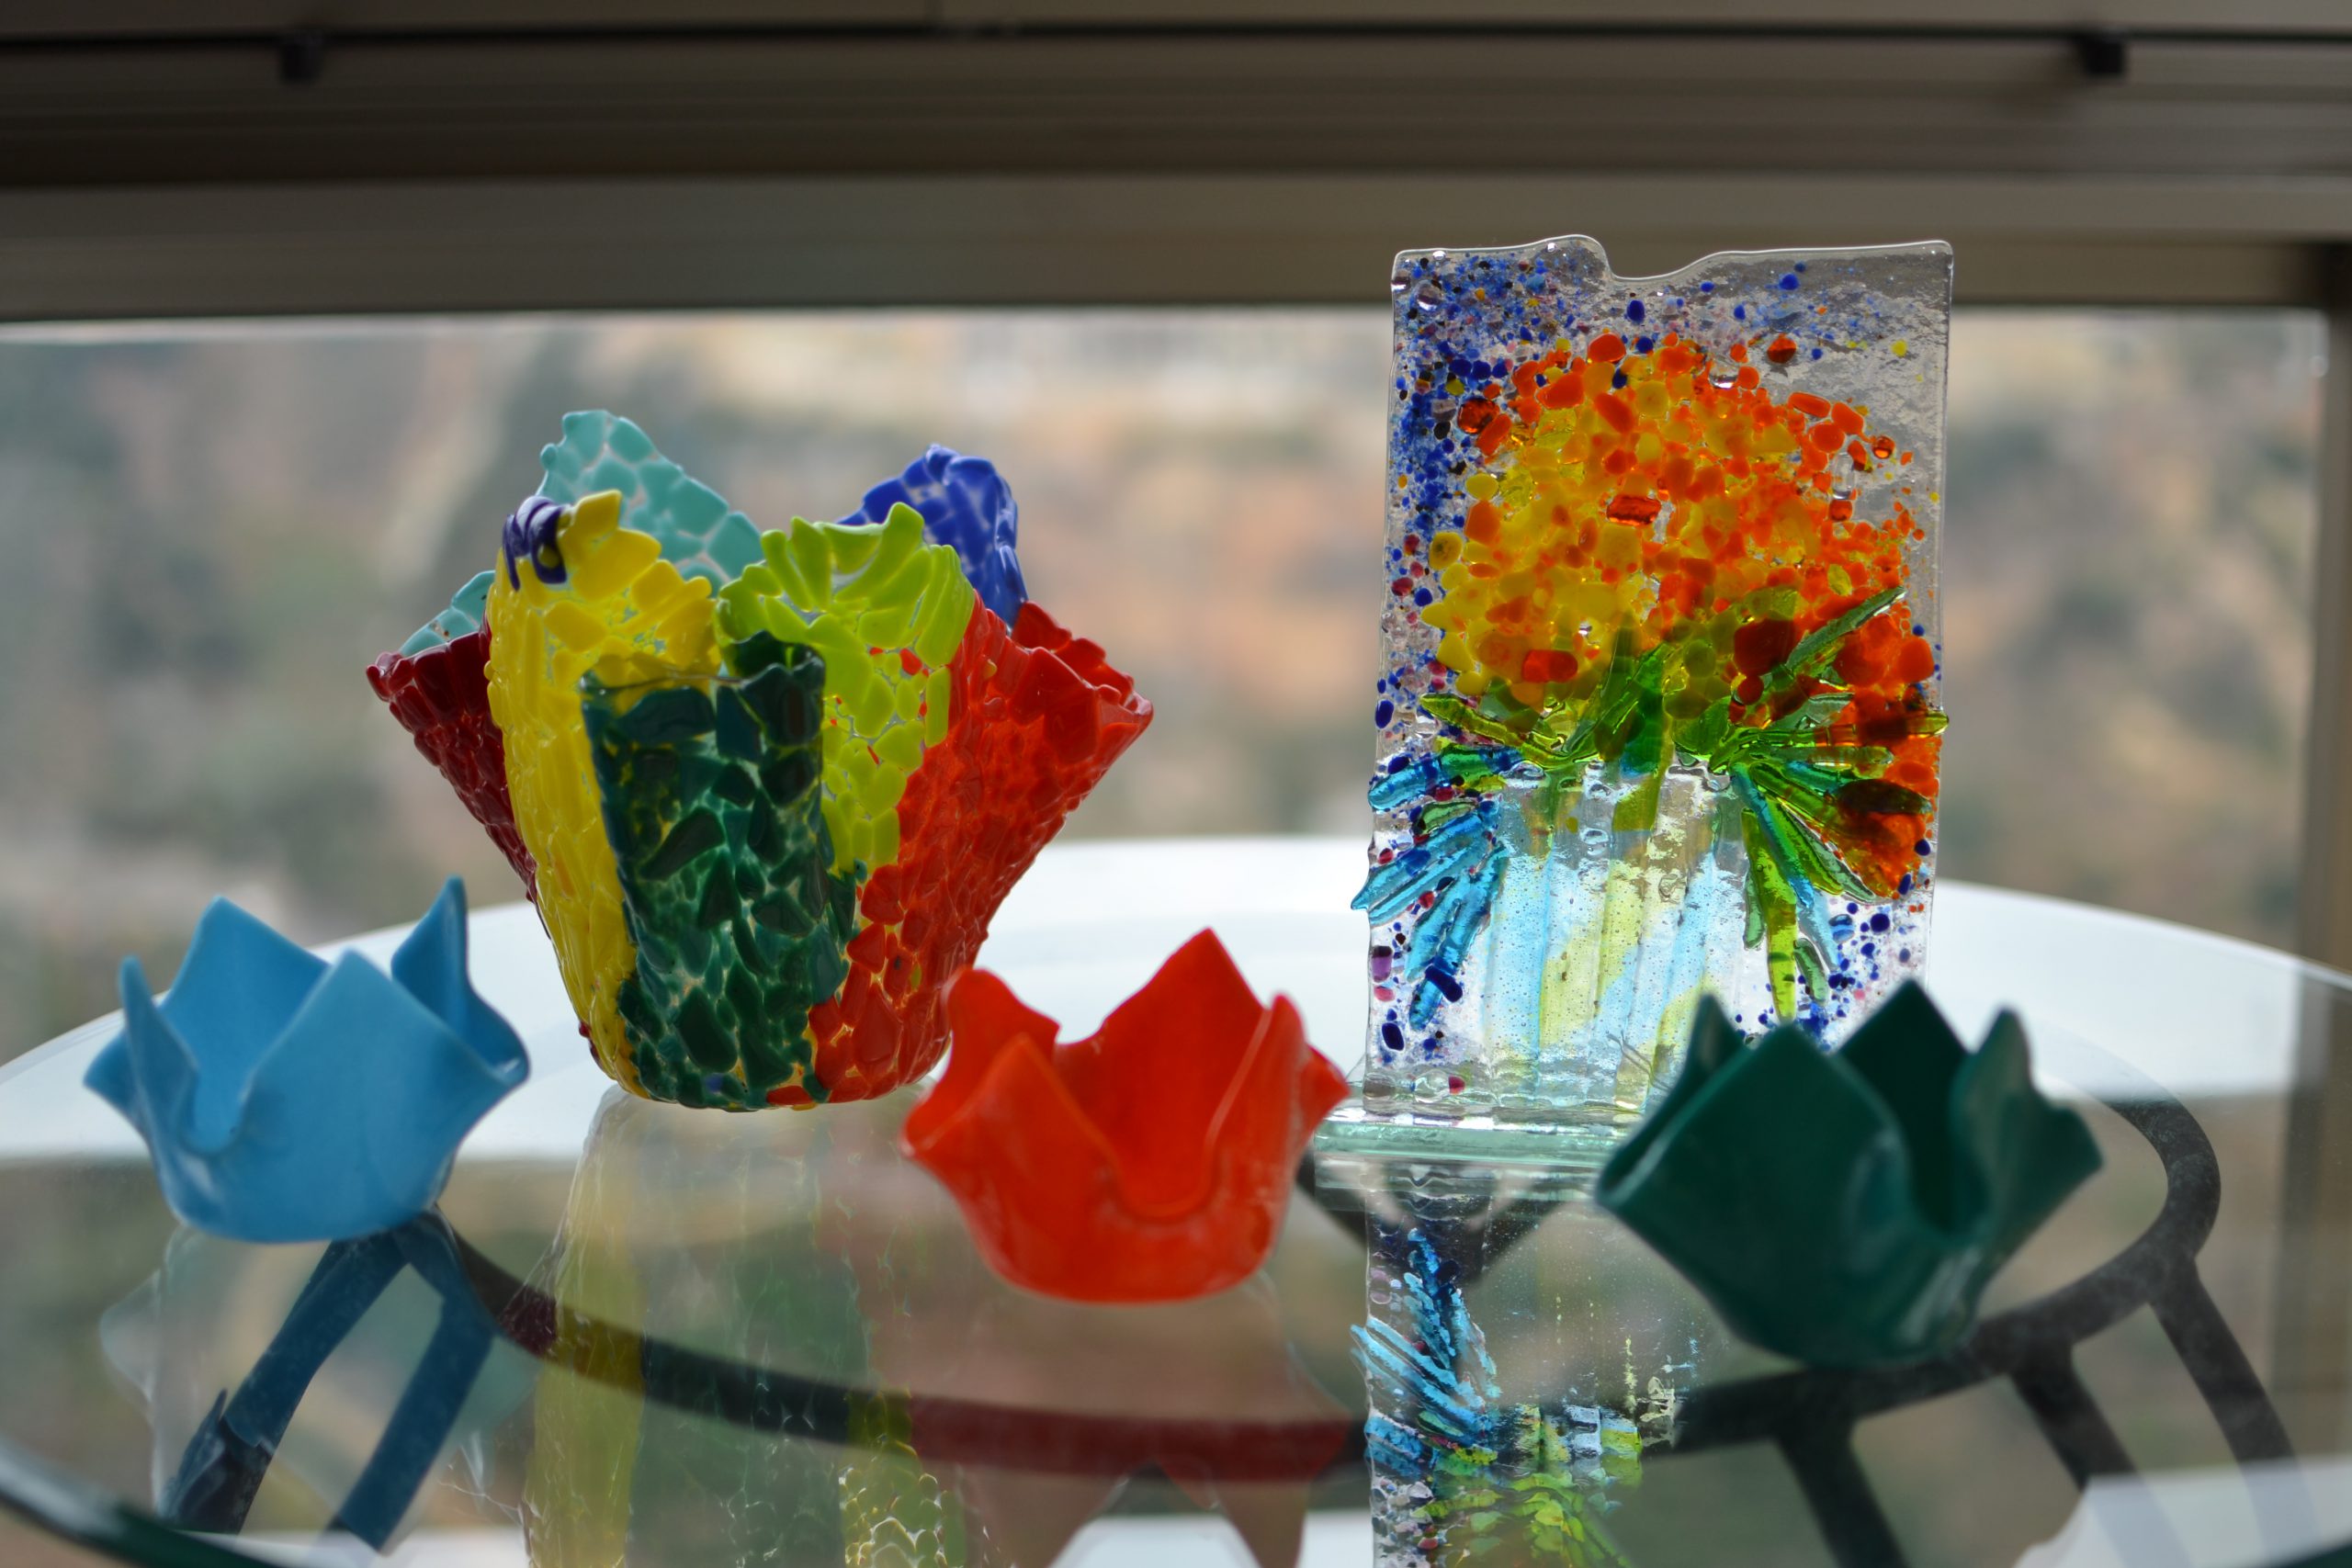 Glass fusion designs by Nada Helou, the Lebanese artist. | Supplied